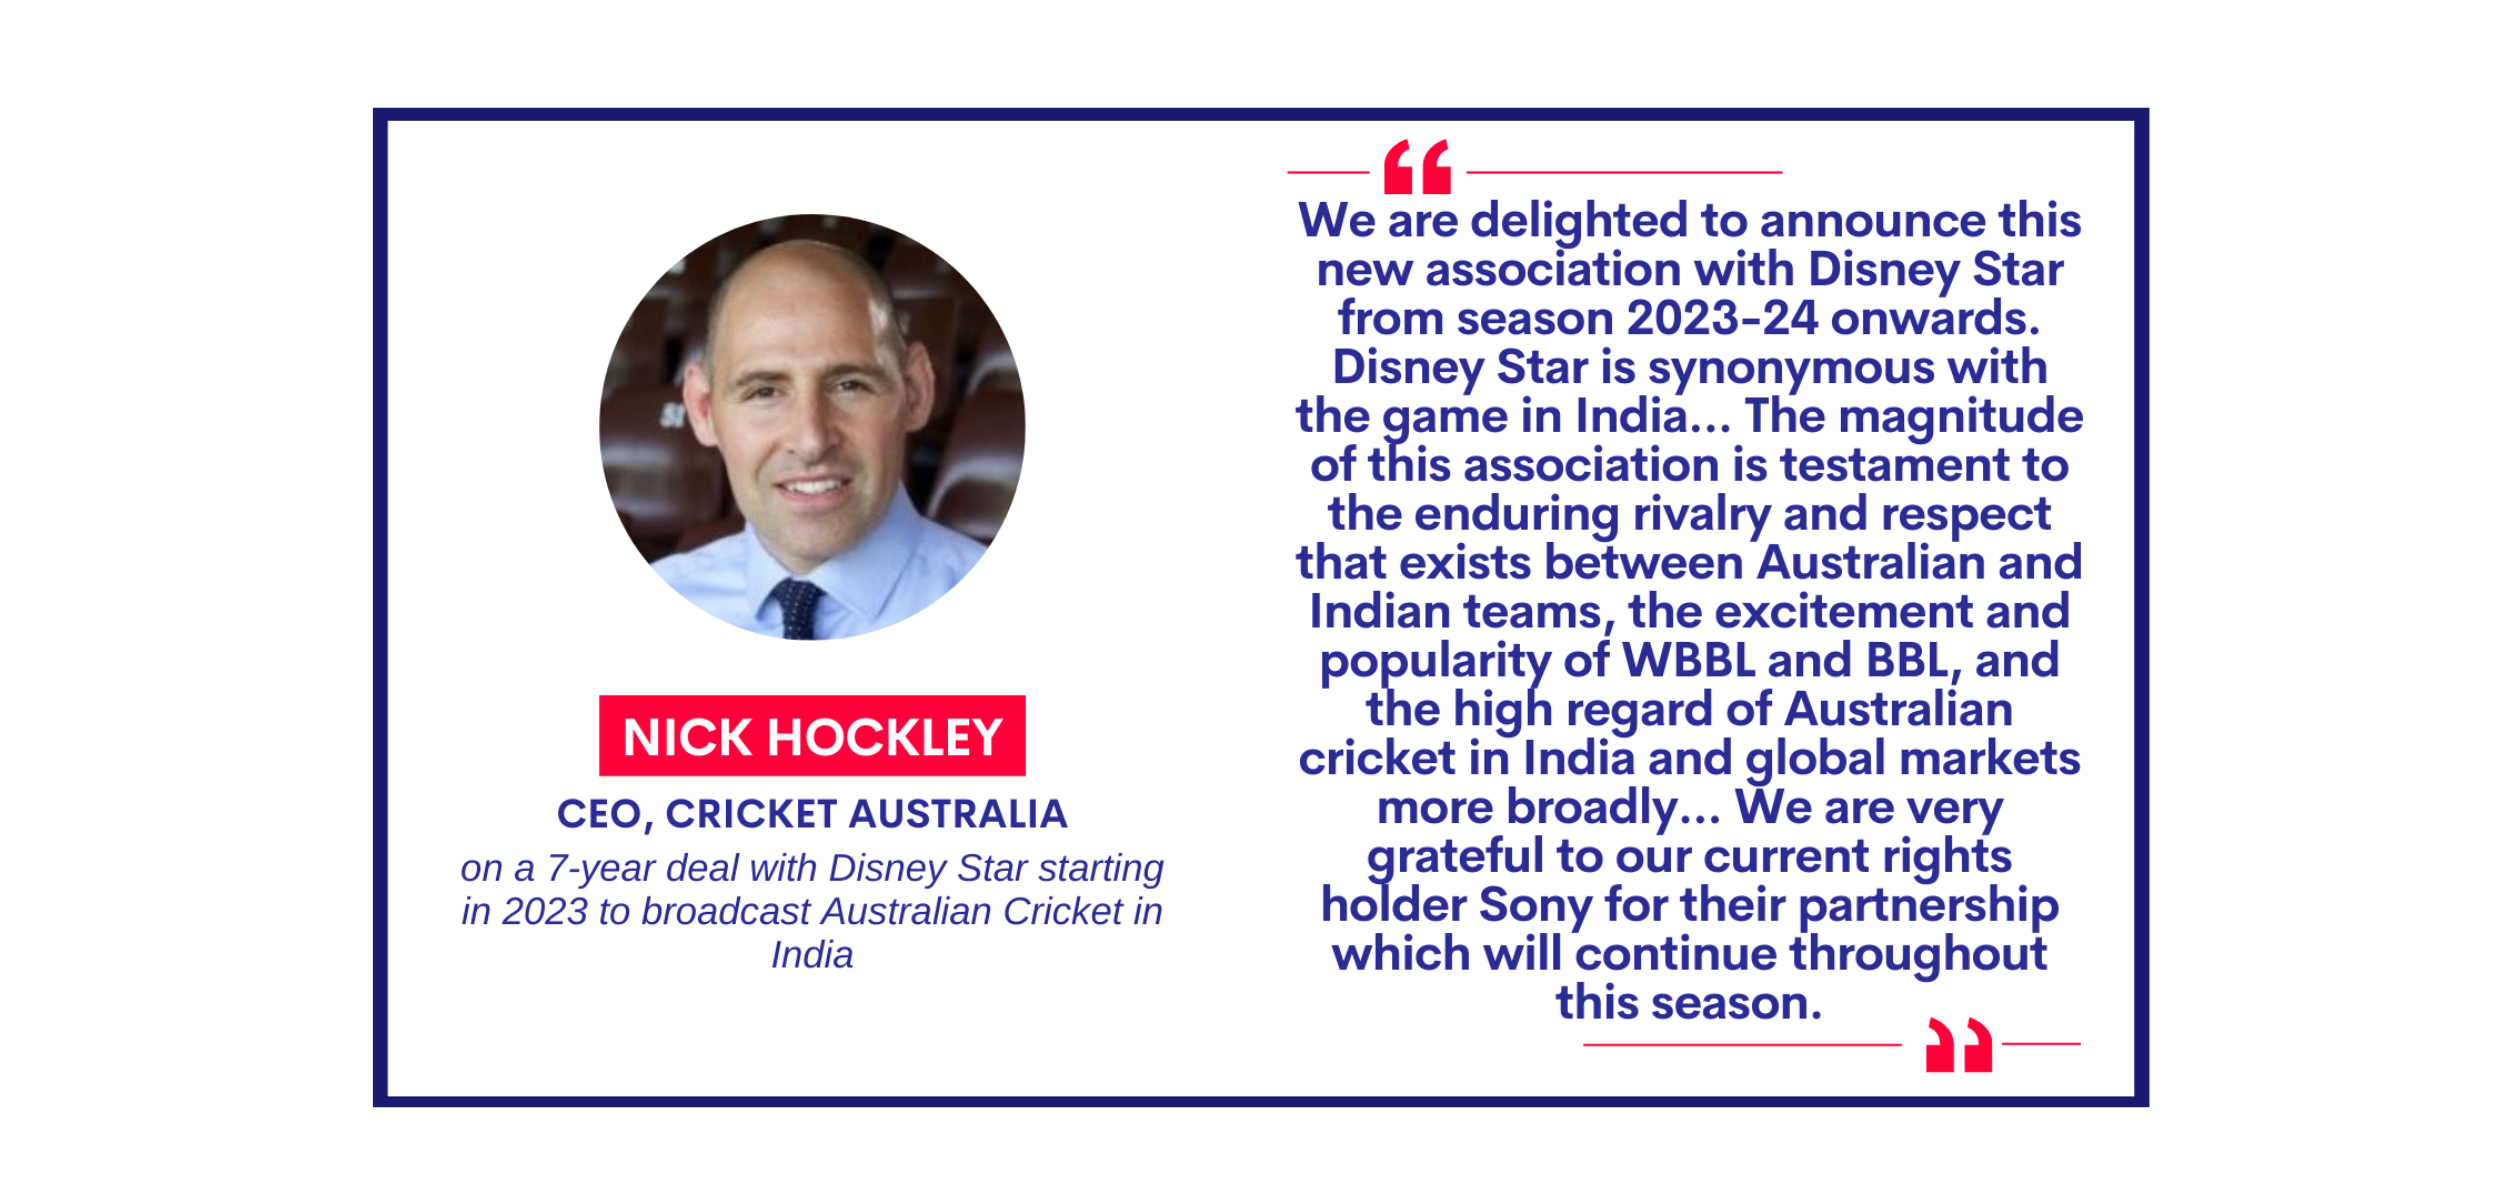 Nick Hockley, CEO, Cricket Australia on a 7-year deal with Disney Star starting in 2023 to broadcast Australian Cricket in Indi